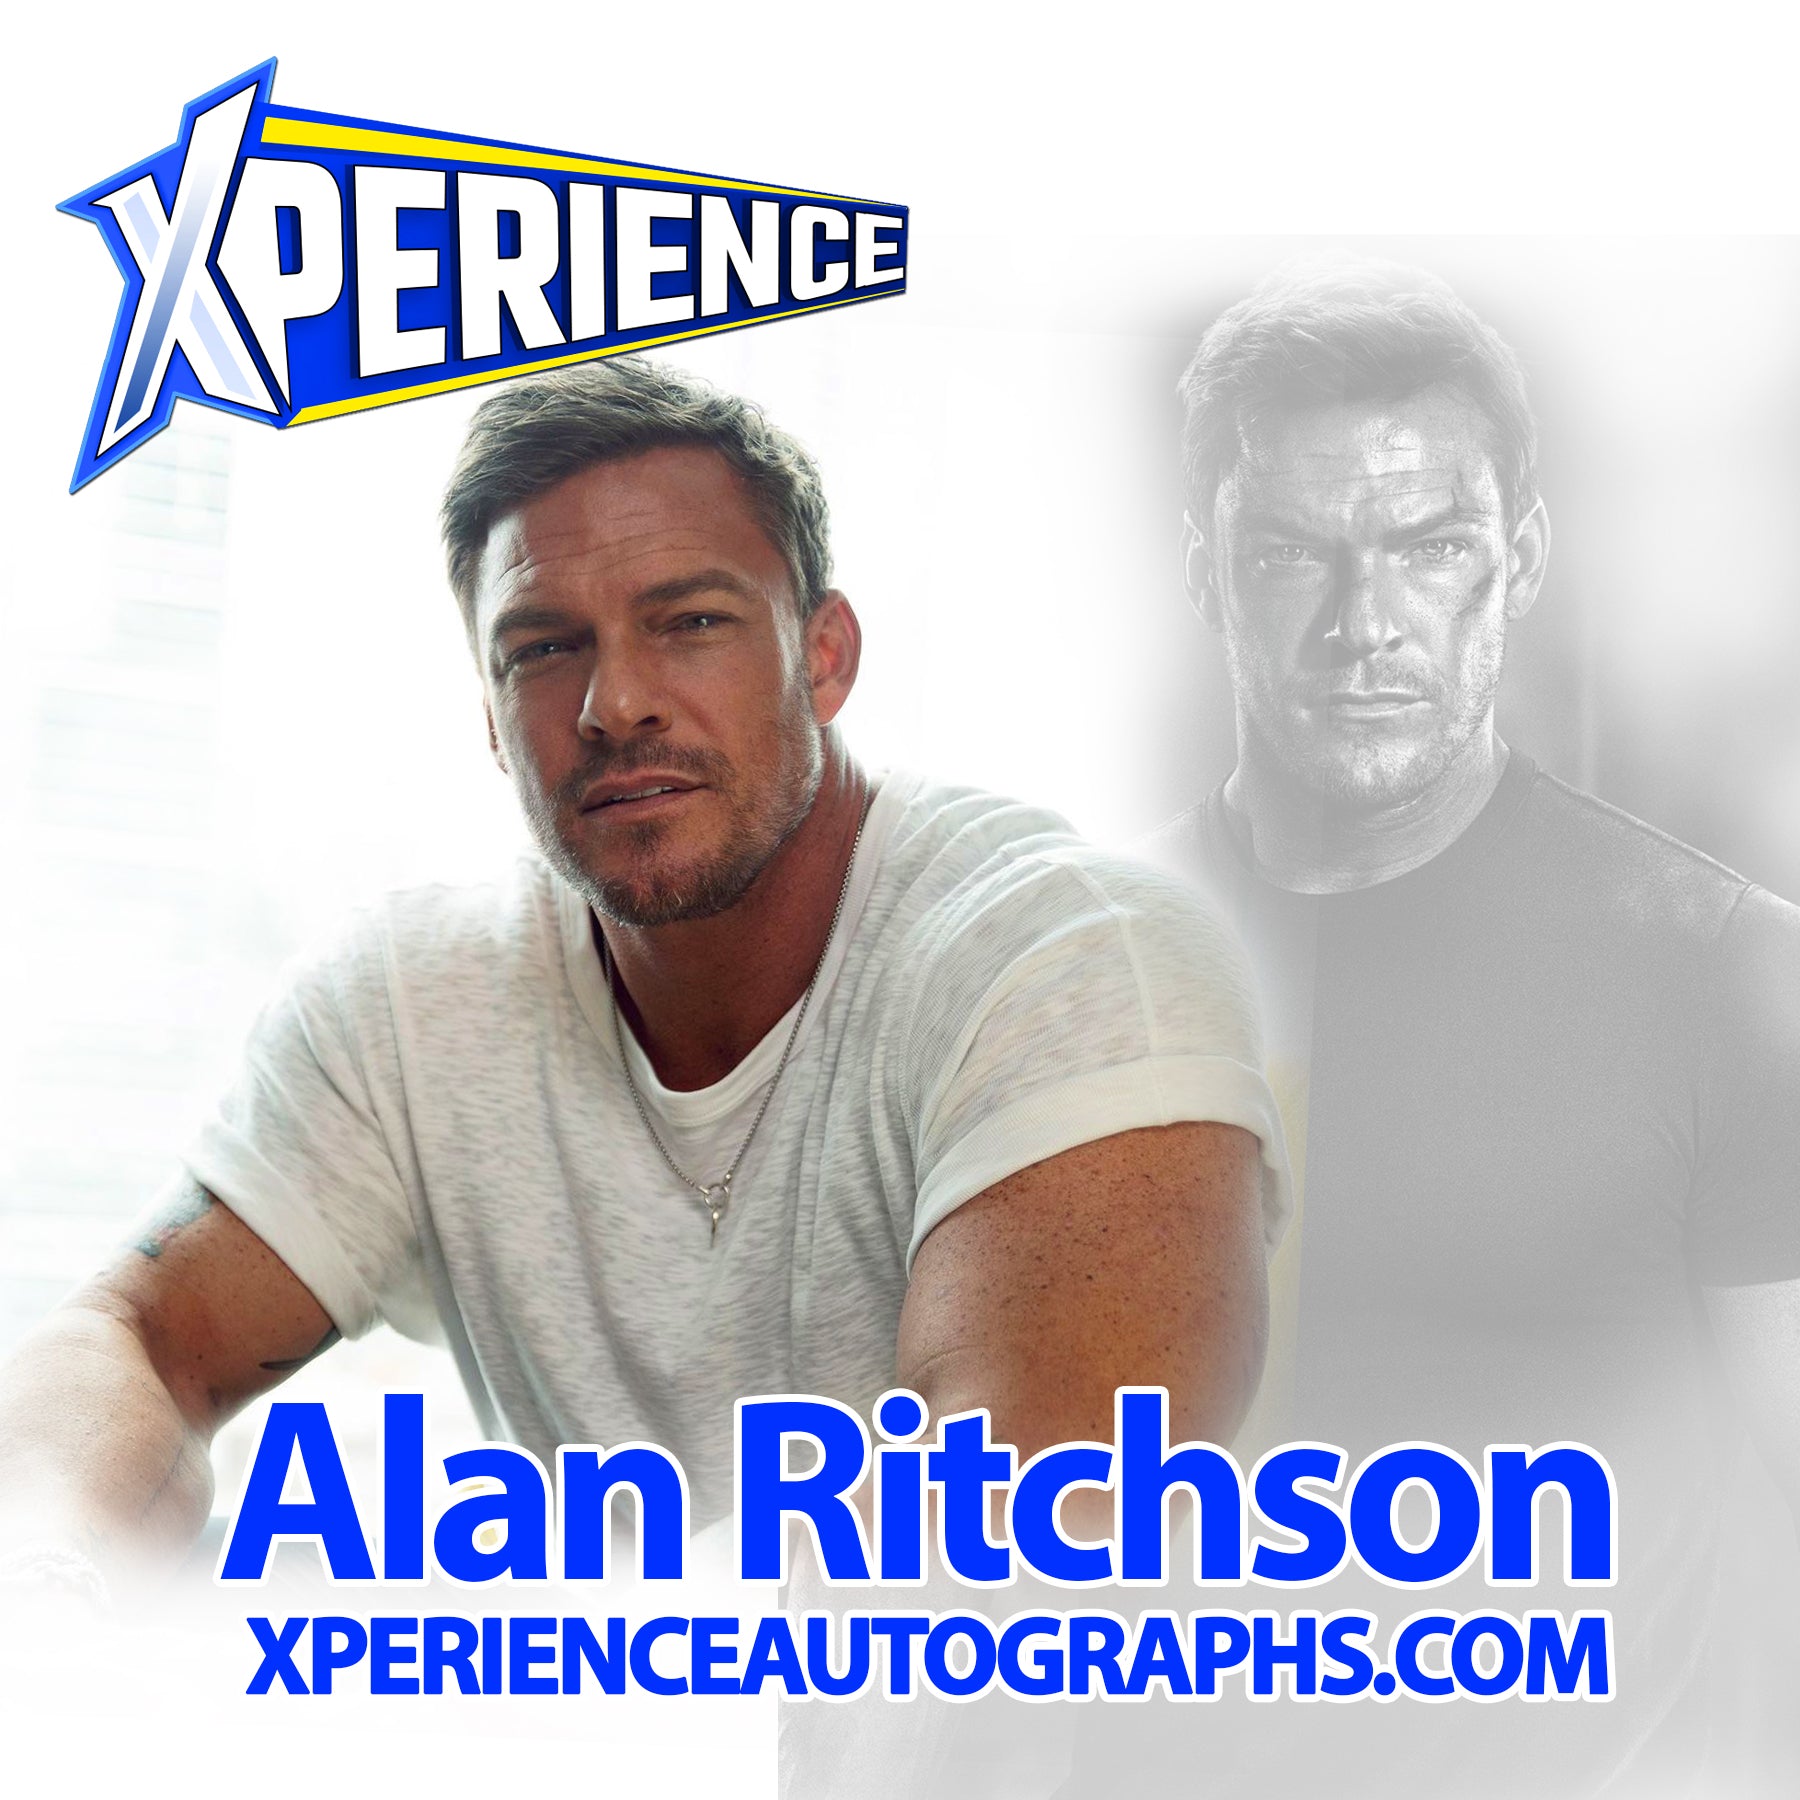 Alan Ritchson (Xperience Autographs)